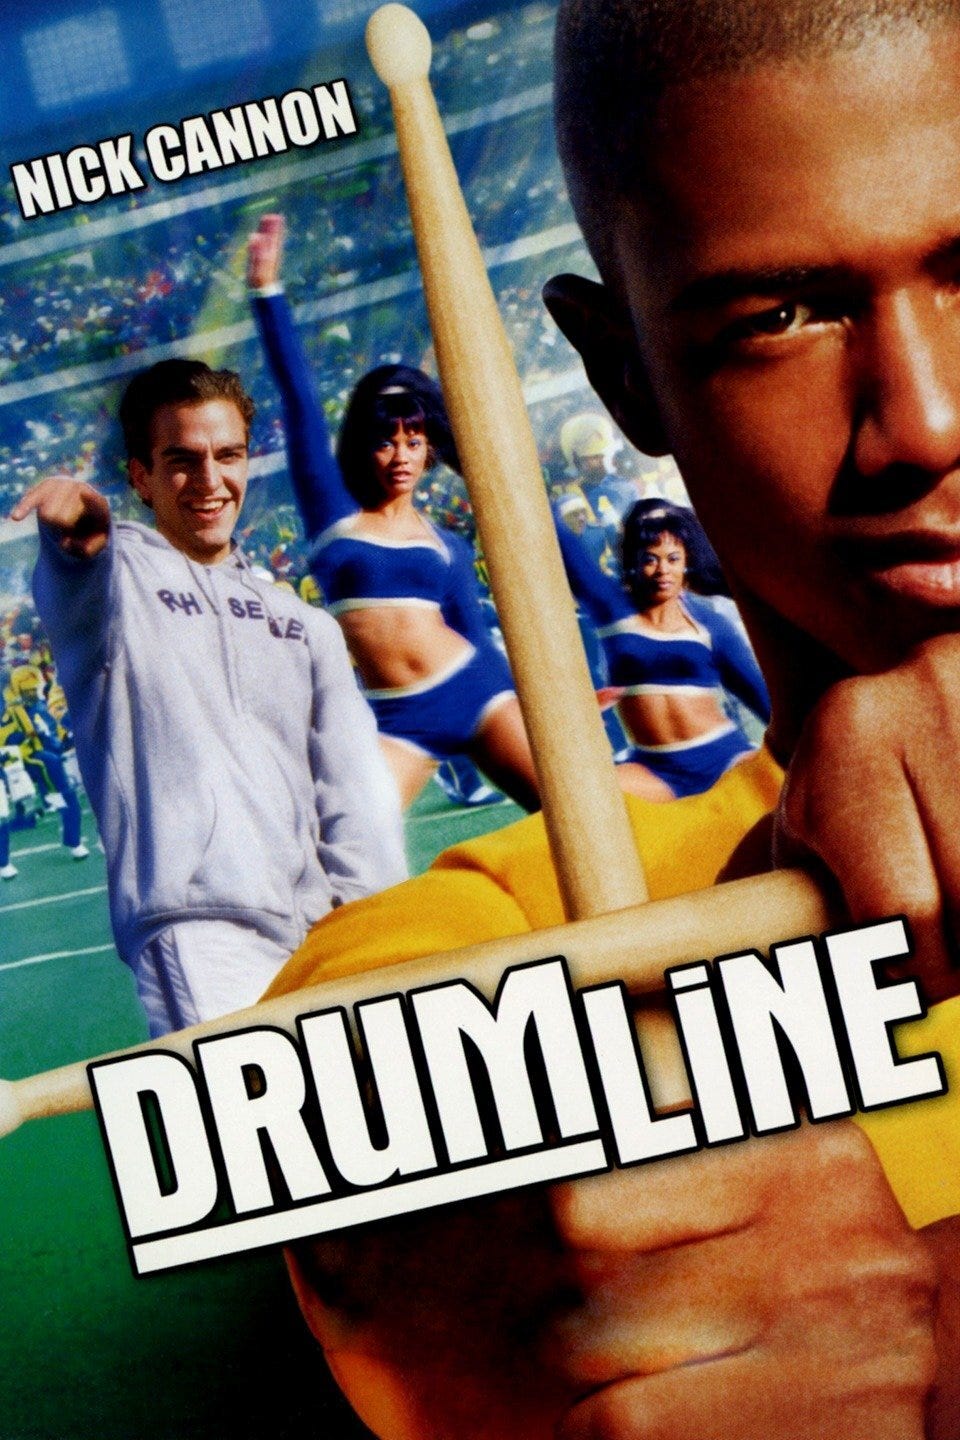 Just thinking about  Drumline  throws me back into Elementary school watching Nick Cannon  do his thing.  It put the pressure of winning the big sport game, on the drumline and I don’t know that there is another movie that captures that black culture quite the same.  Available now on Hulu. (6/30/20)